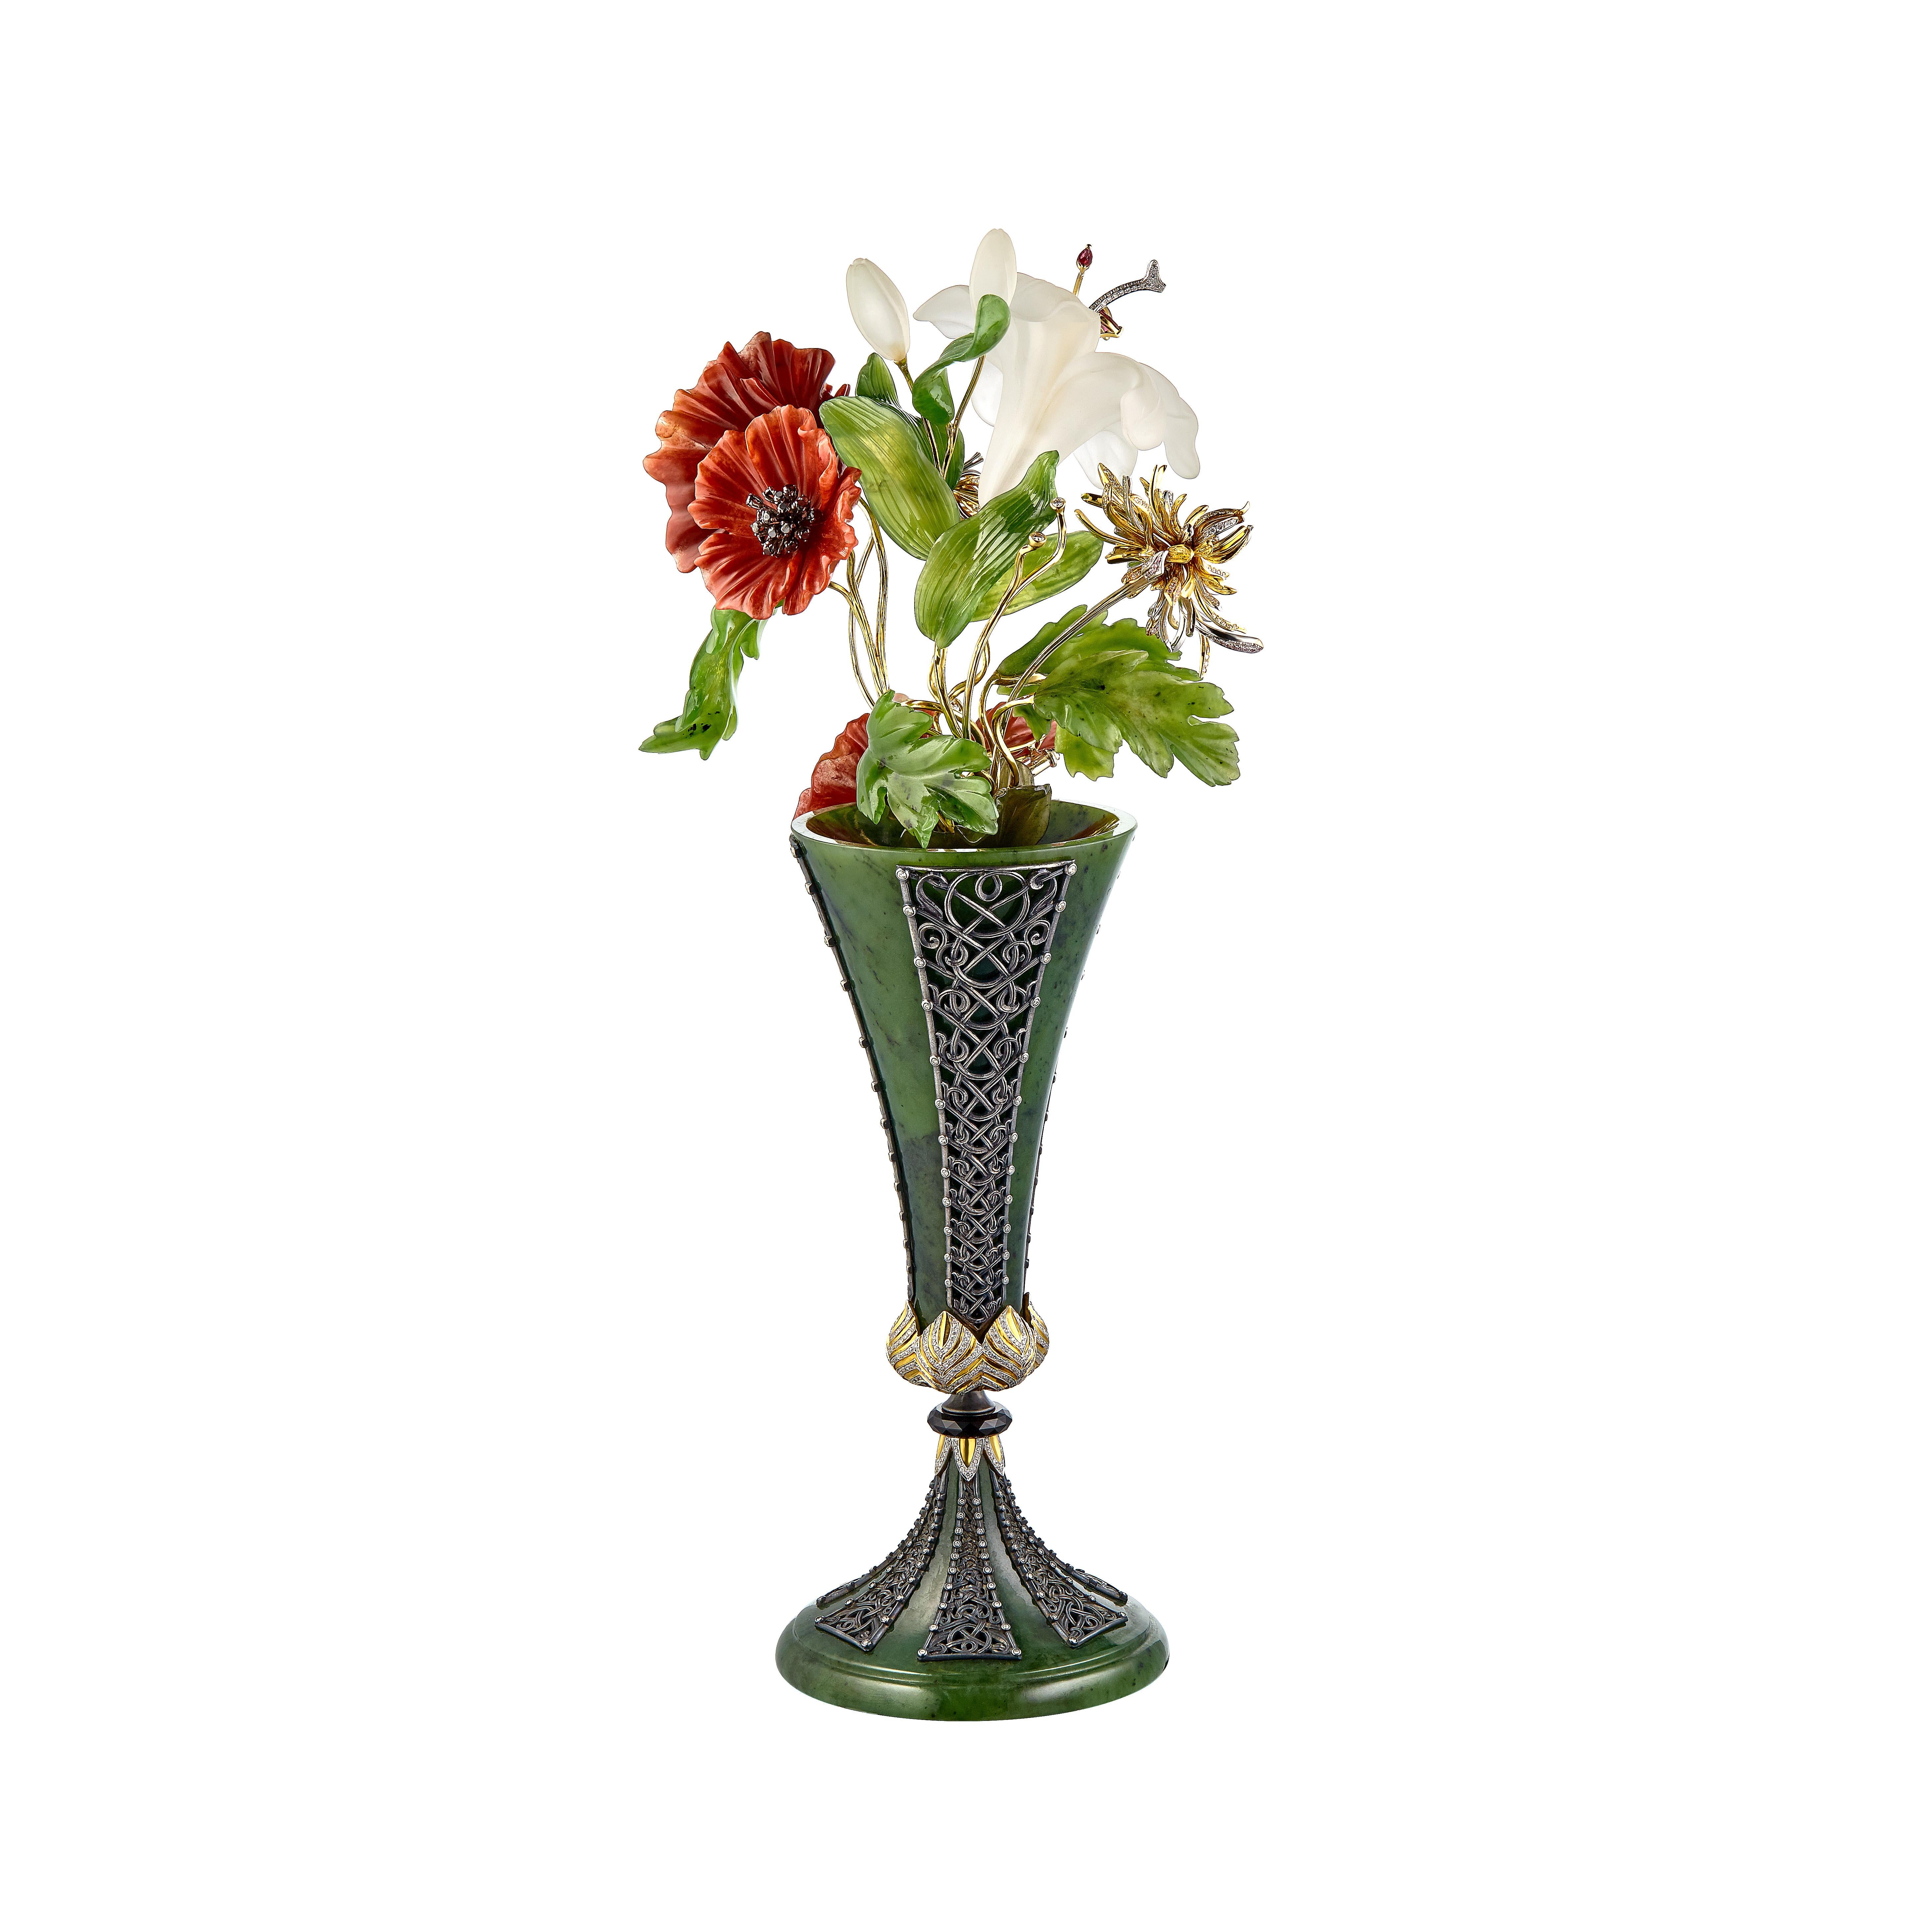 Gold floral compositions with precious or semi-precious stones or enamel became popular at the turn of the 20th century in Europe and Russia. Especially Imperial families and nobilities collected or gifted to important people.

This floral miniature